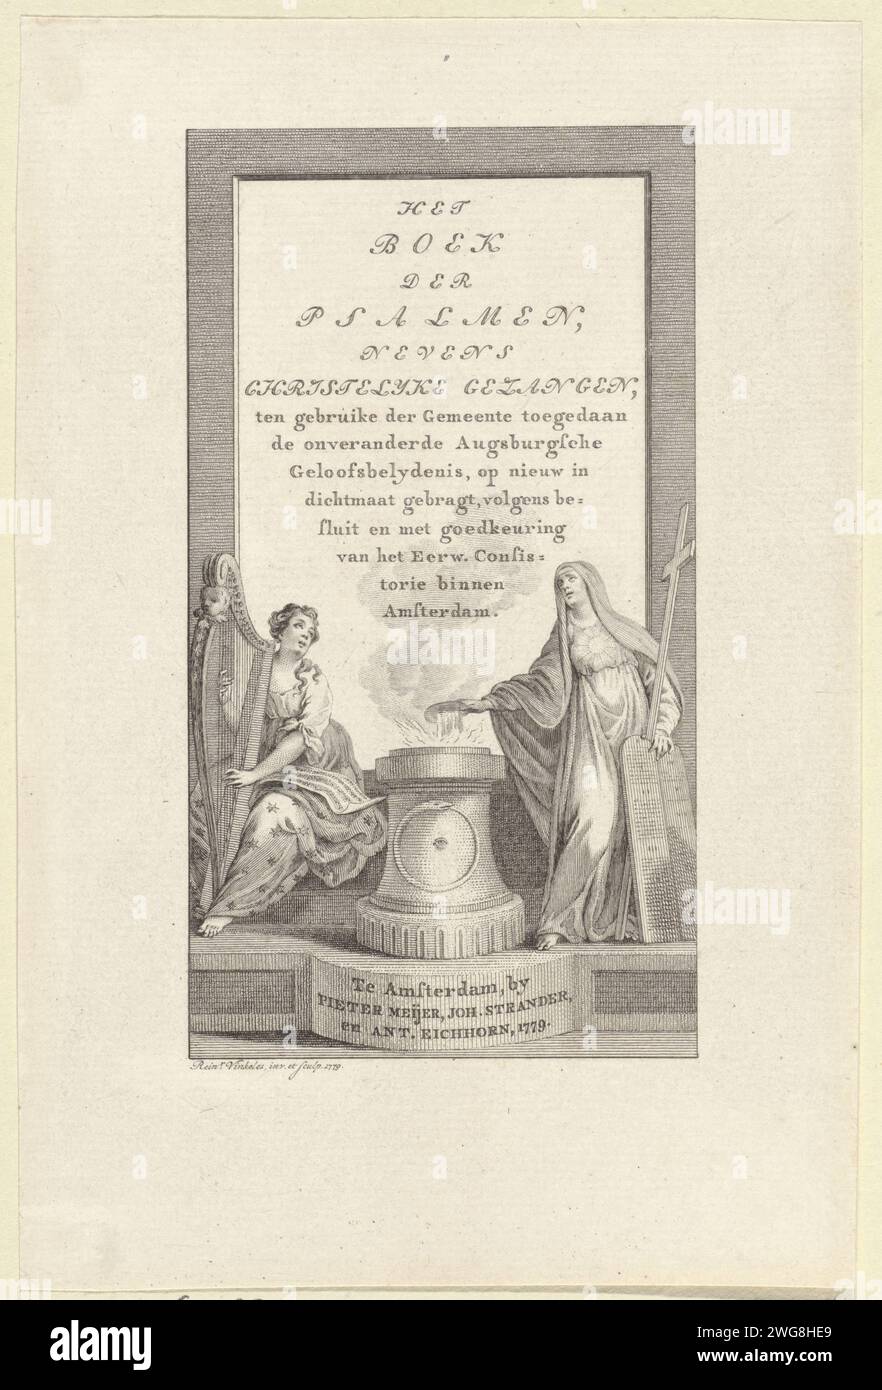 Title page for: 'The book der Psalmen, Near Christelyke Zangenen', 1779, Reinier Vinkeles (I), 1779 print  Amsterdam paper etching / engraving altar. serpent Ouroboros. Trust (+ allegorical scene, i.e. two or more personifications involved in an action). harp Stock Photo